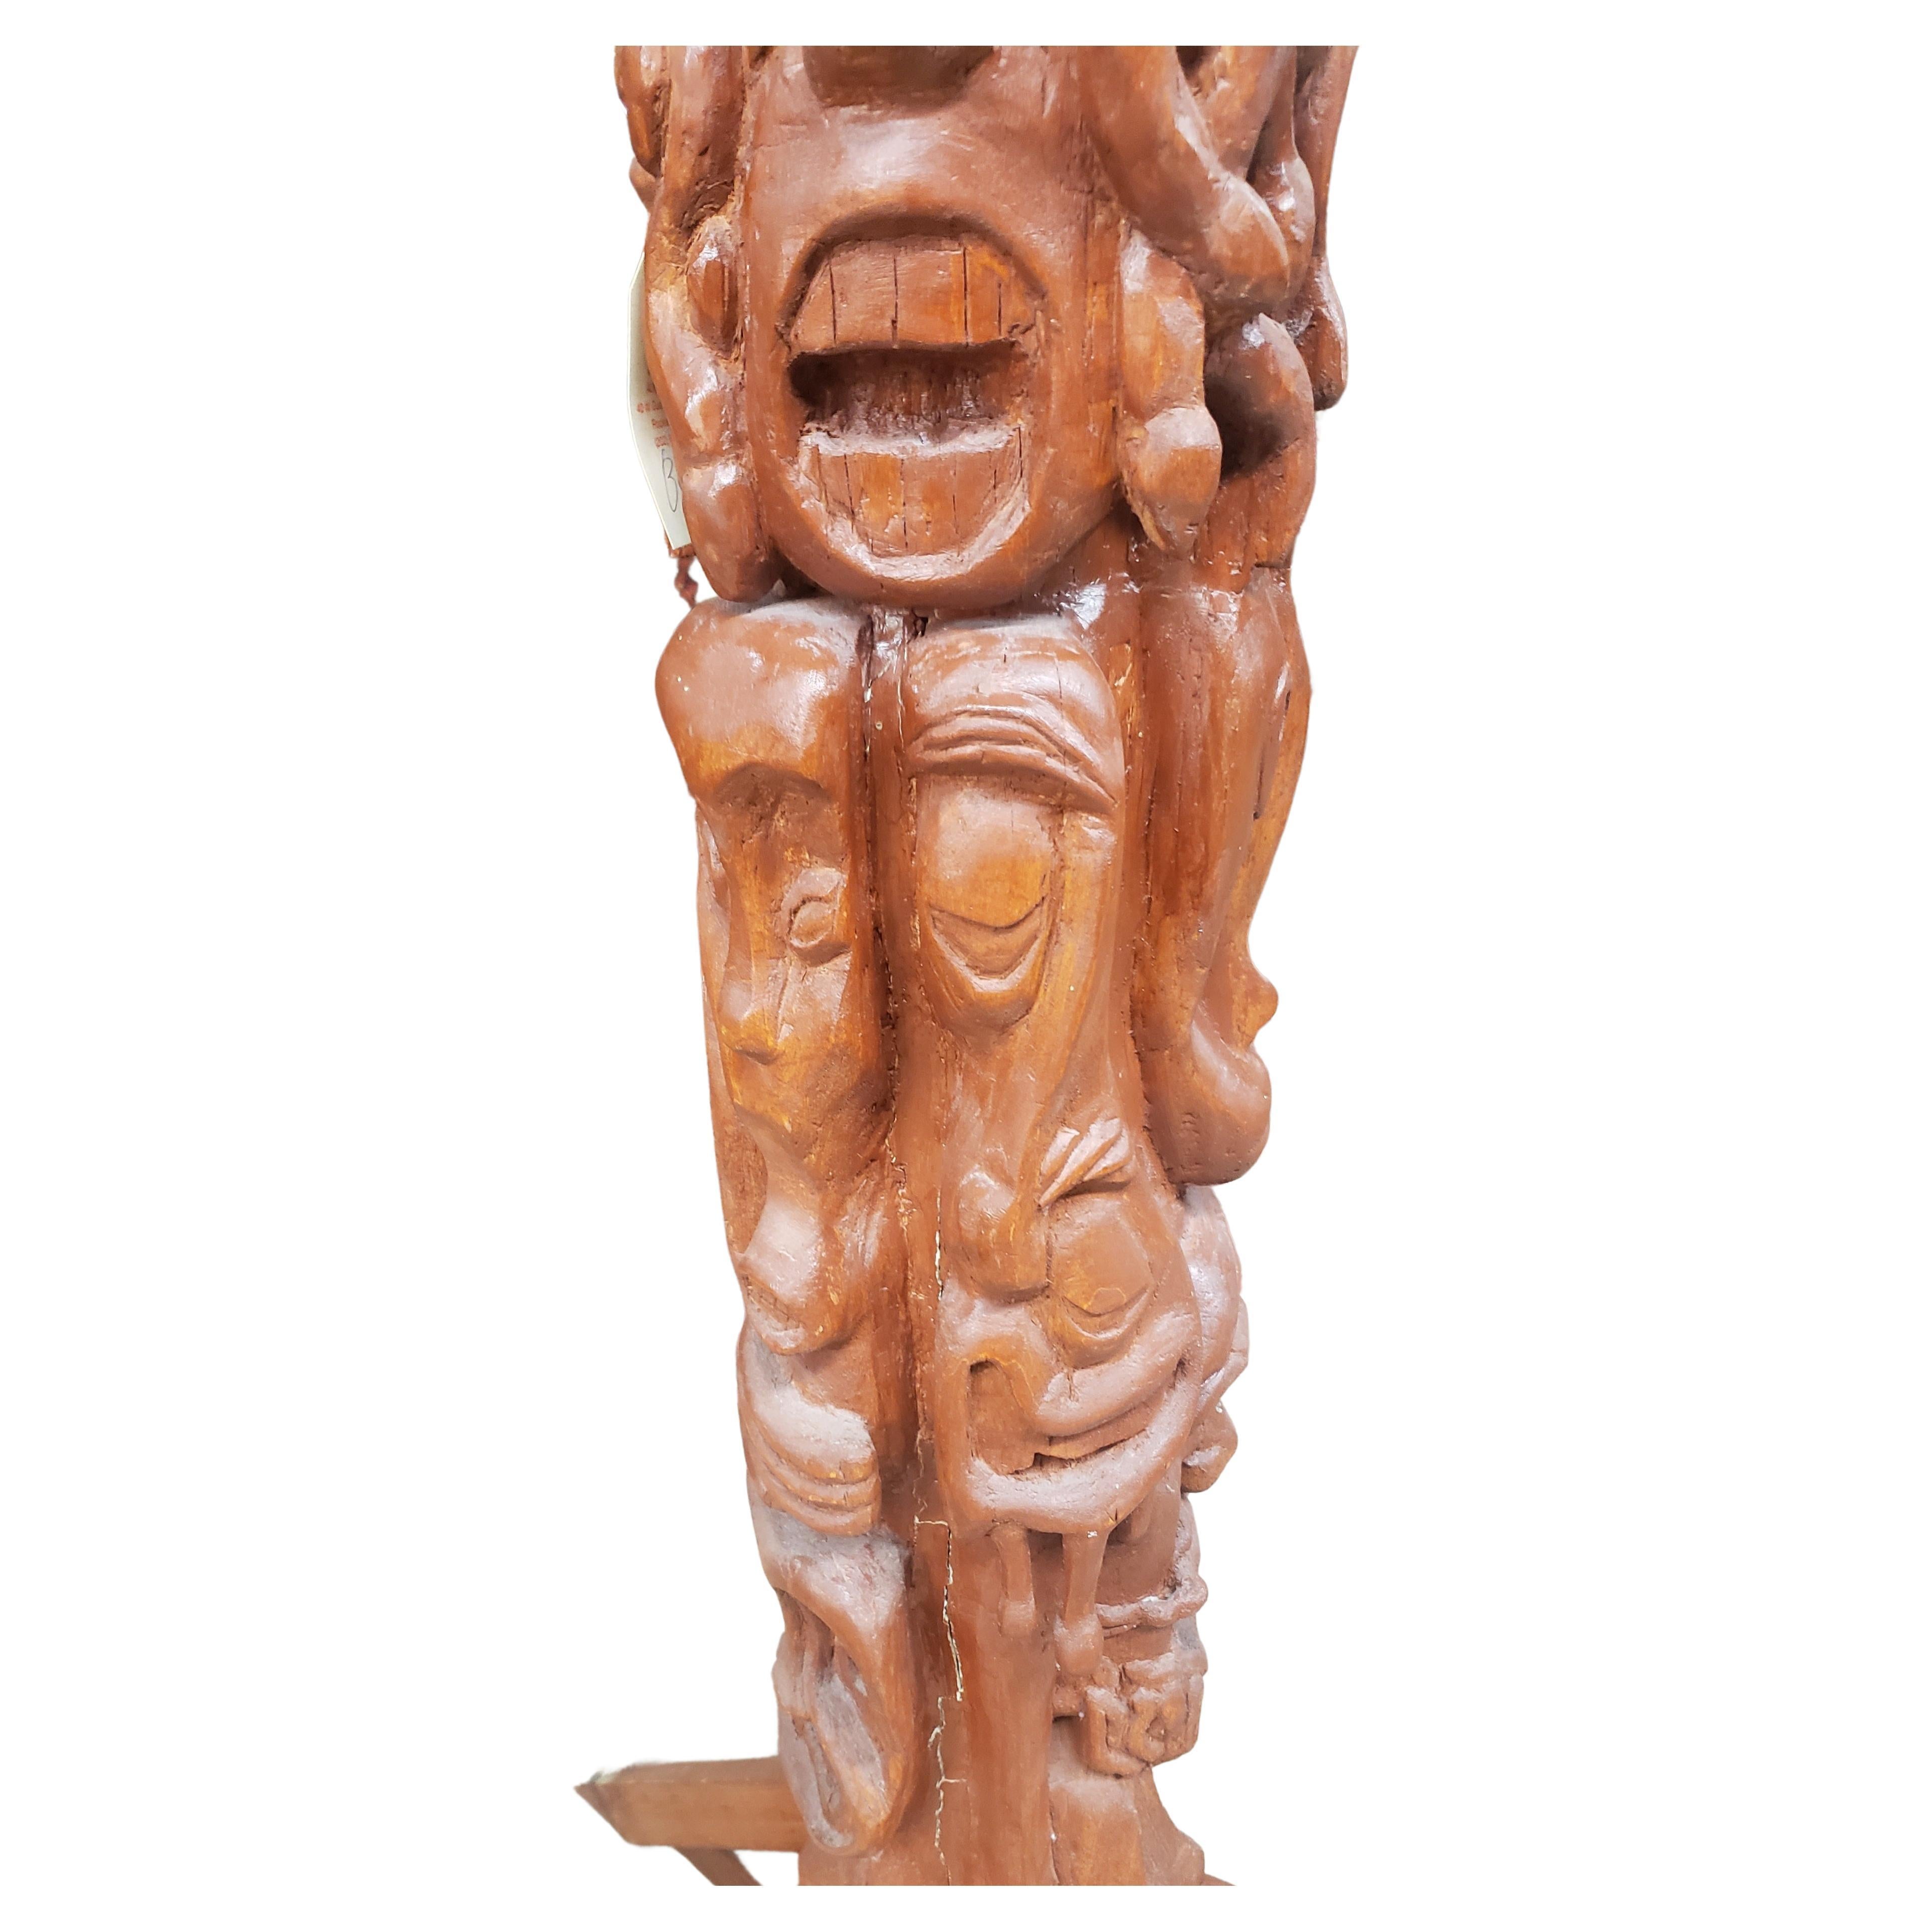 A very large 19th century North-Western Indian figural Carved Wood Totem Pole.
This very rare Pole measures 8